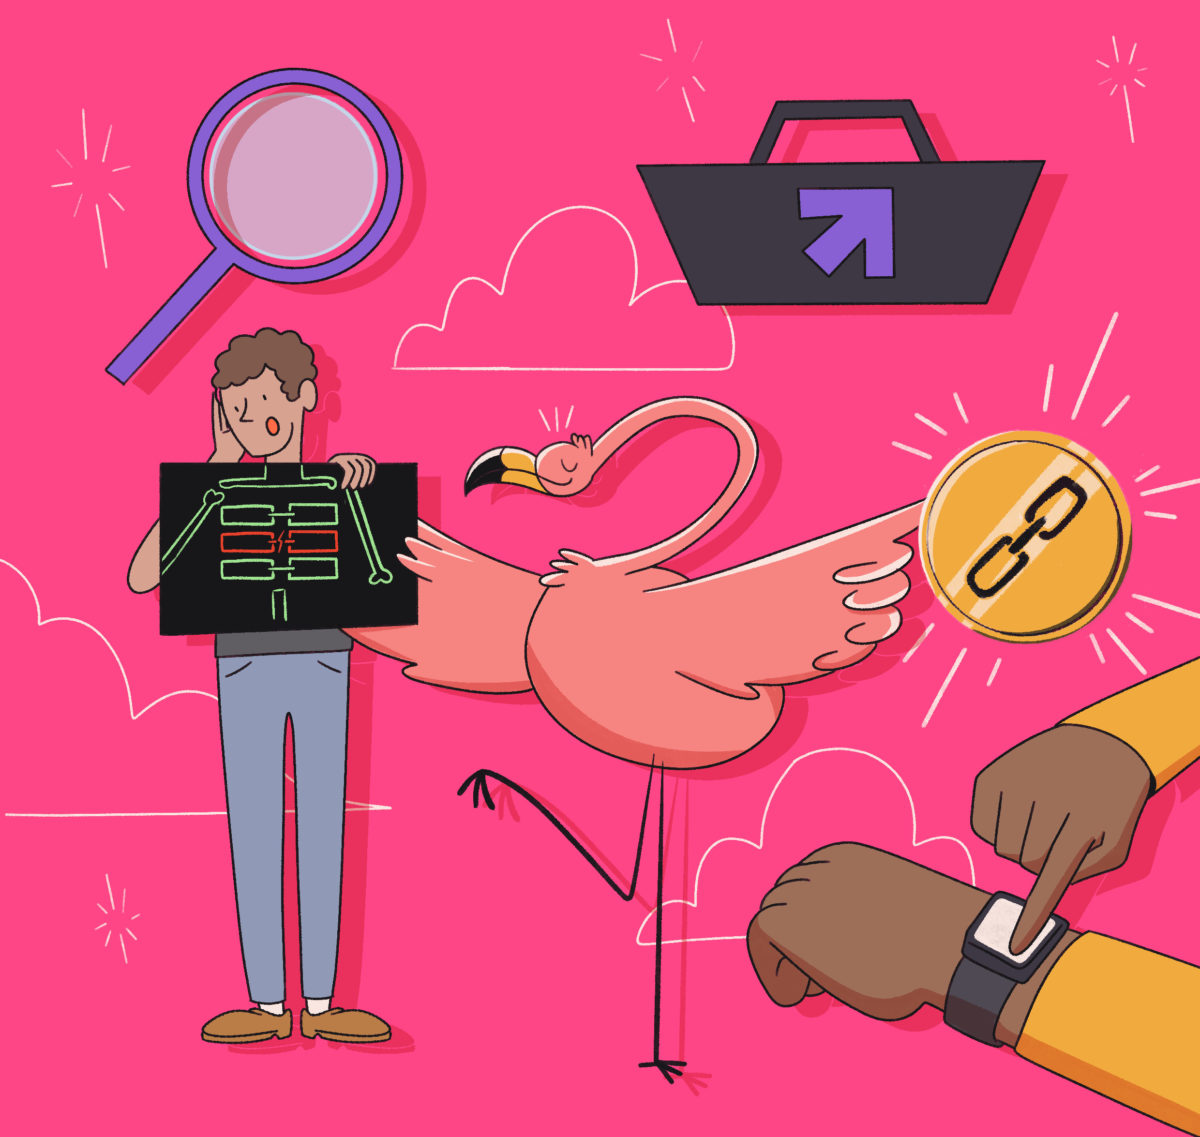 Illustration of various objects and a person against a pink background, including a briefcase with an arrow, a magnifying glass, a flamingo, a link chain, and a person holding a clipboard.